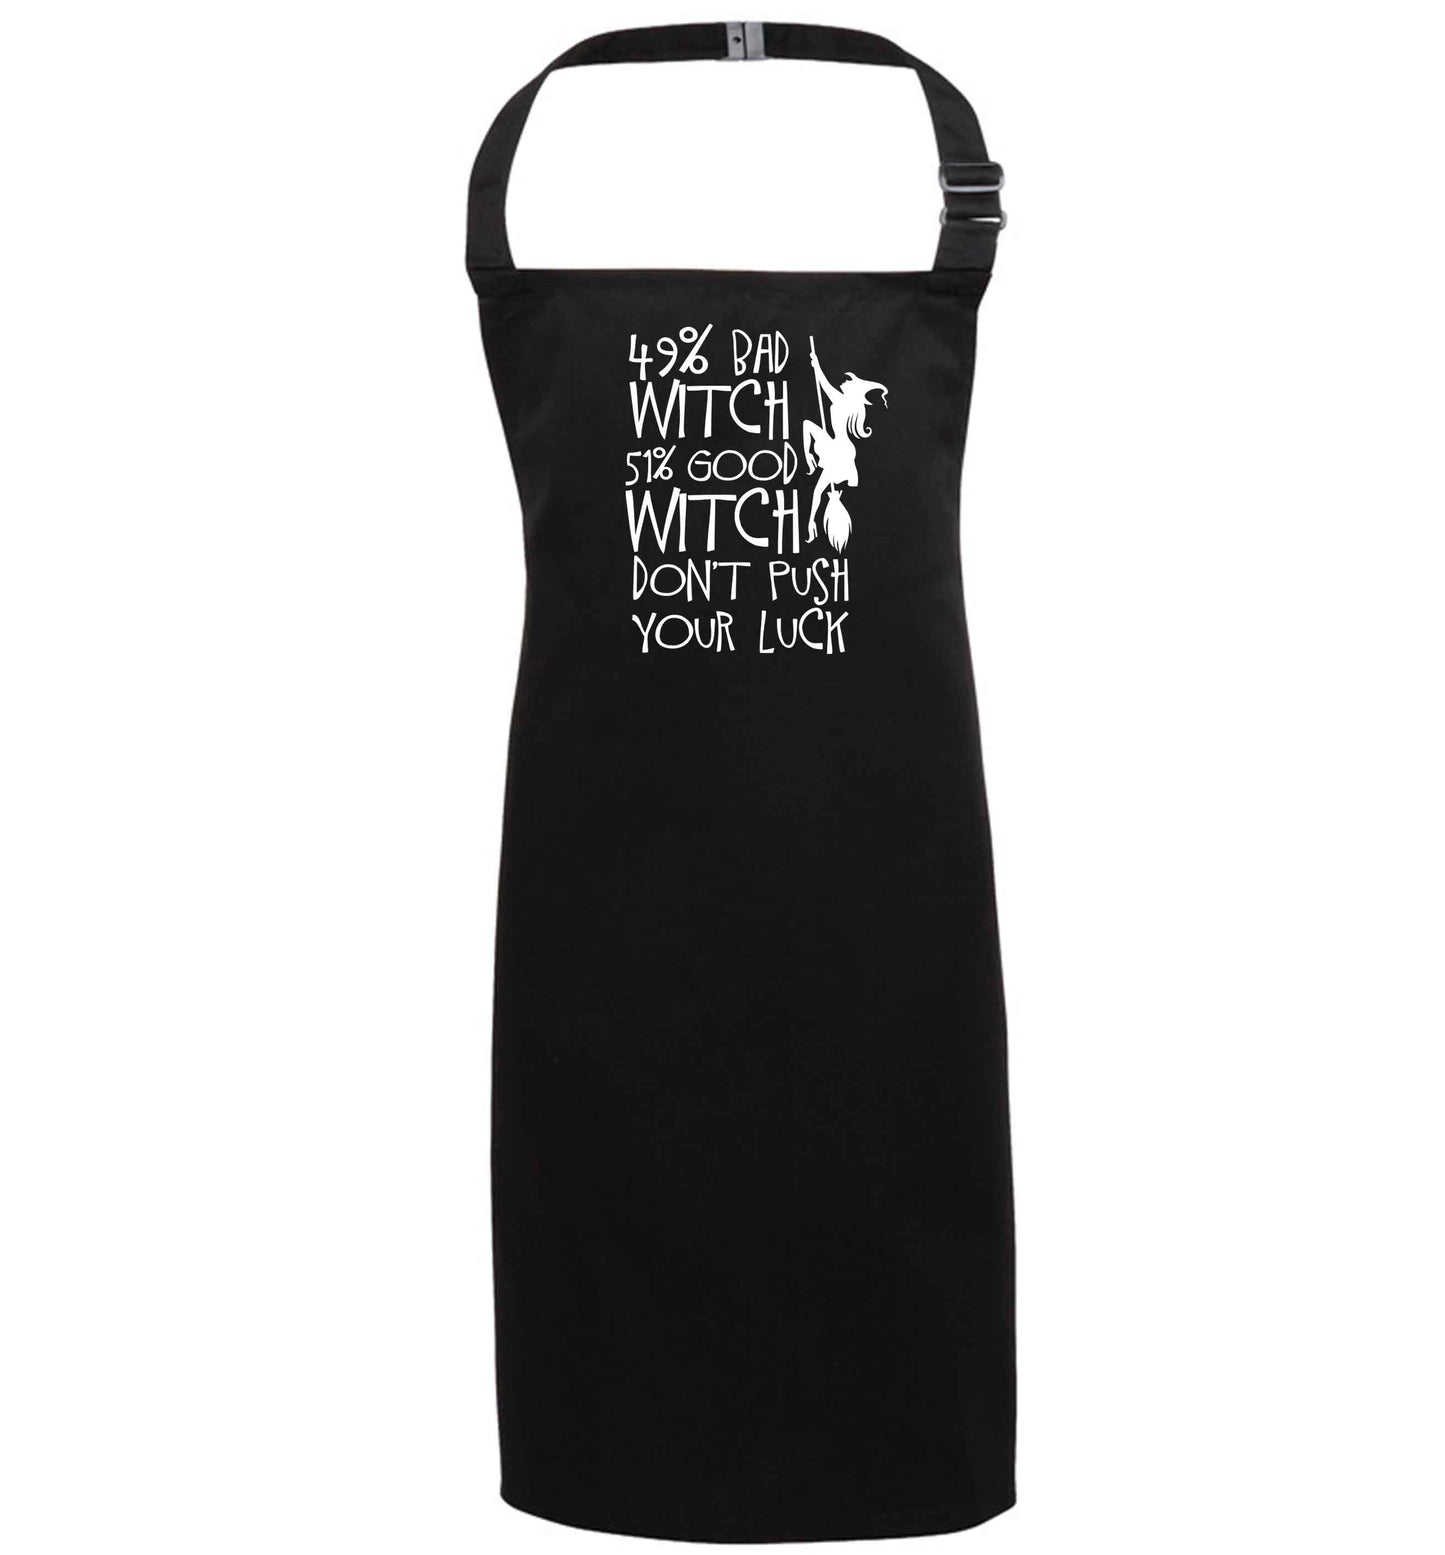 49% bad witch 51% good witch don't push your luck black apron 7-10 years